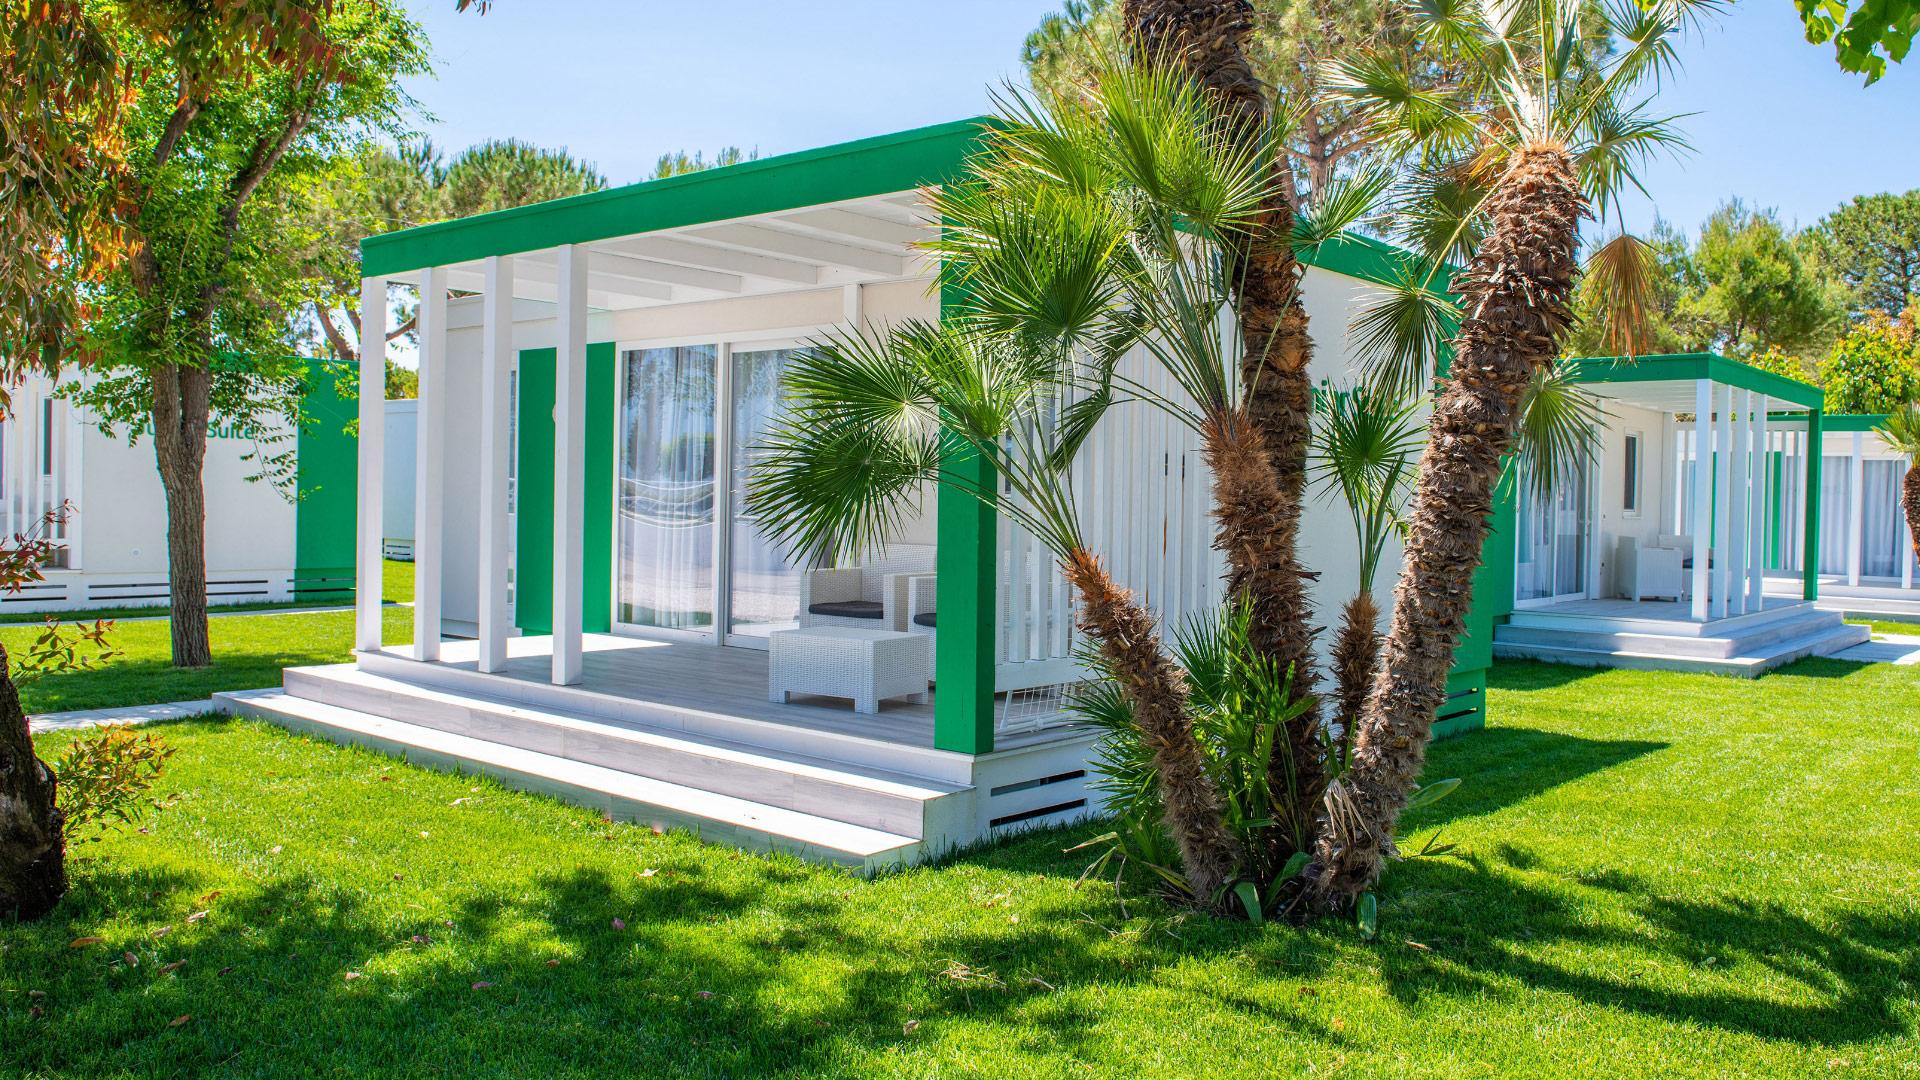 holidayfamilyvillage en campsite-by-the-sea-in-porto-sant-elpidio-for-an-outdoor-holiday-in-le-marche 010